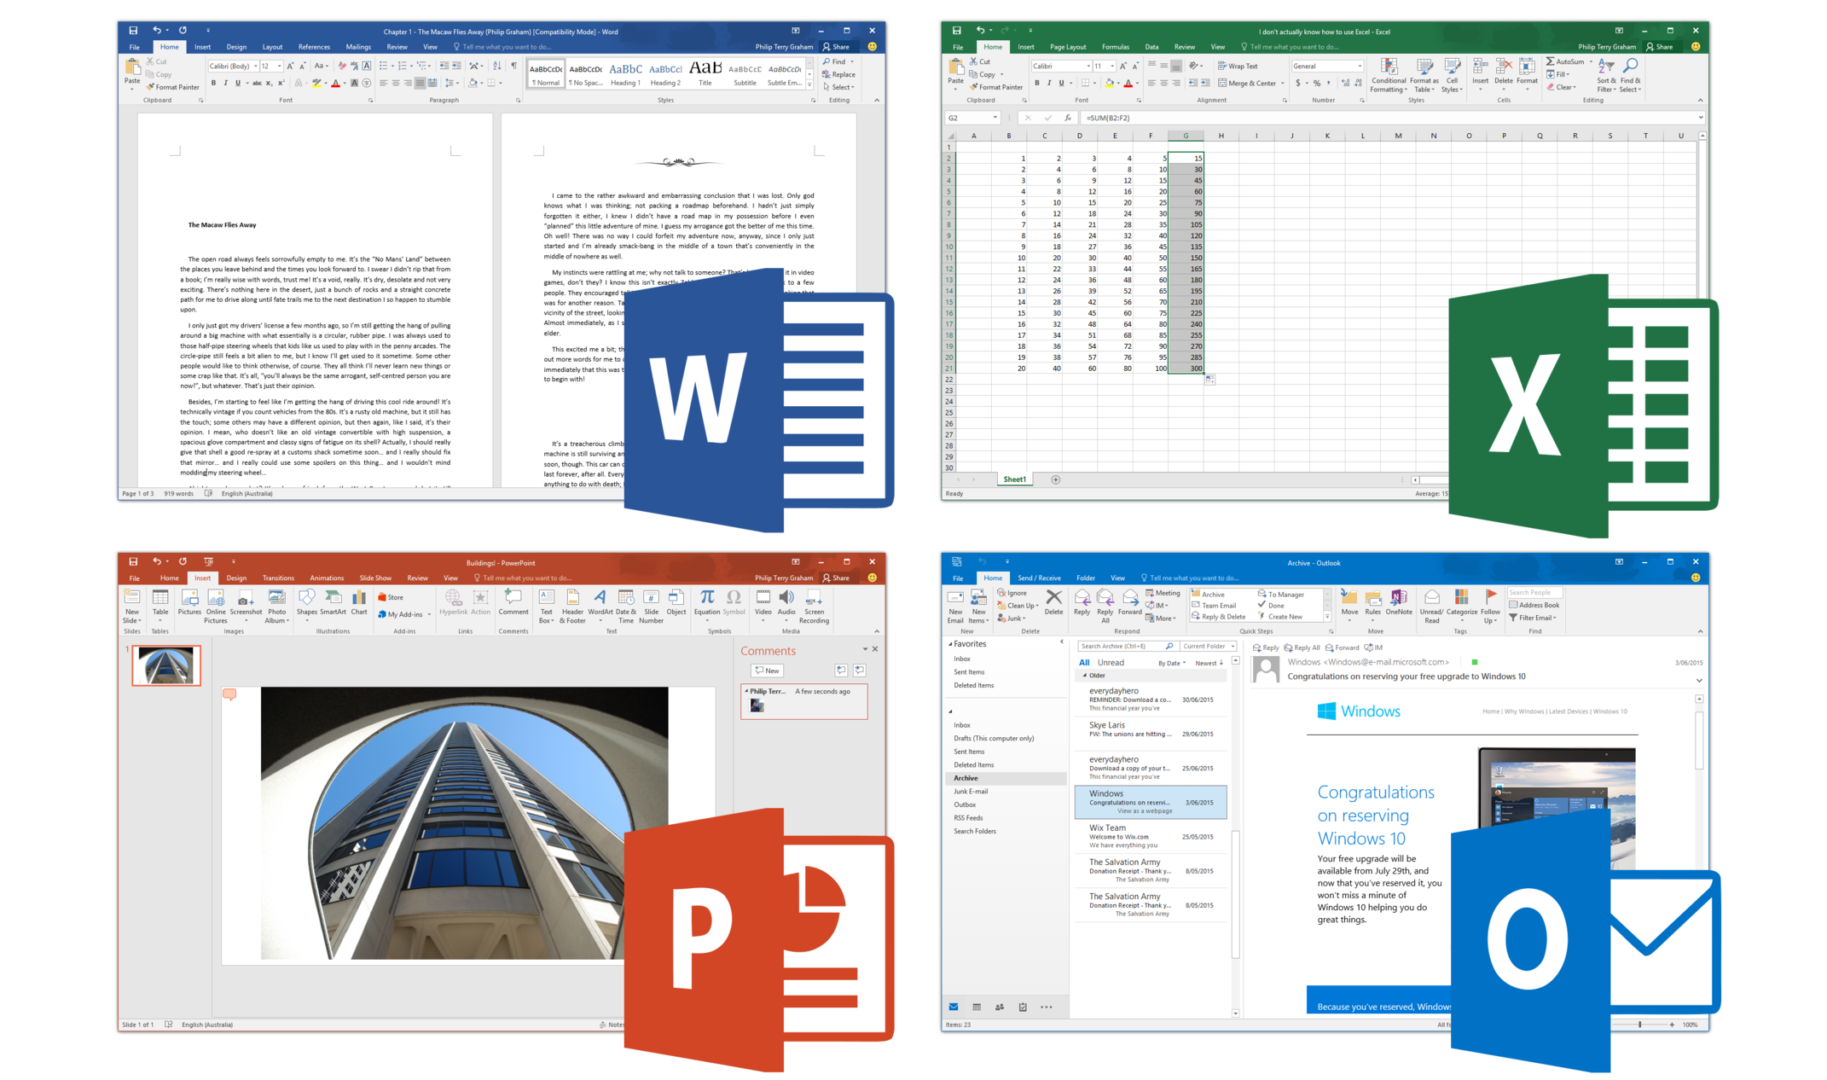 download office 2016 professional